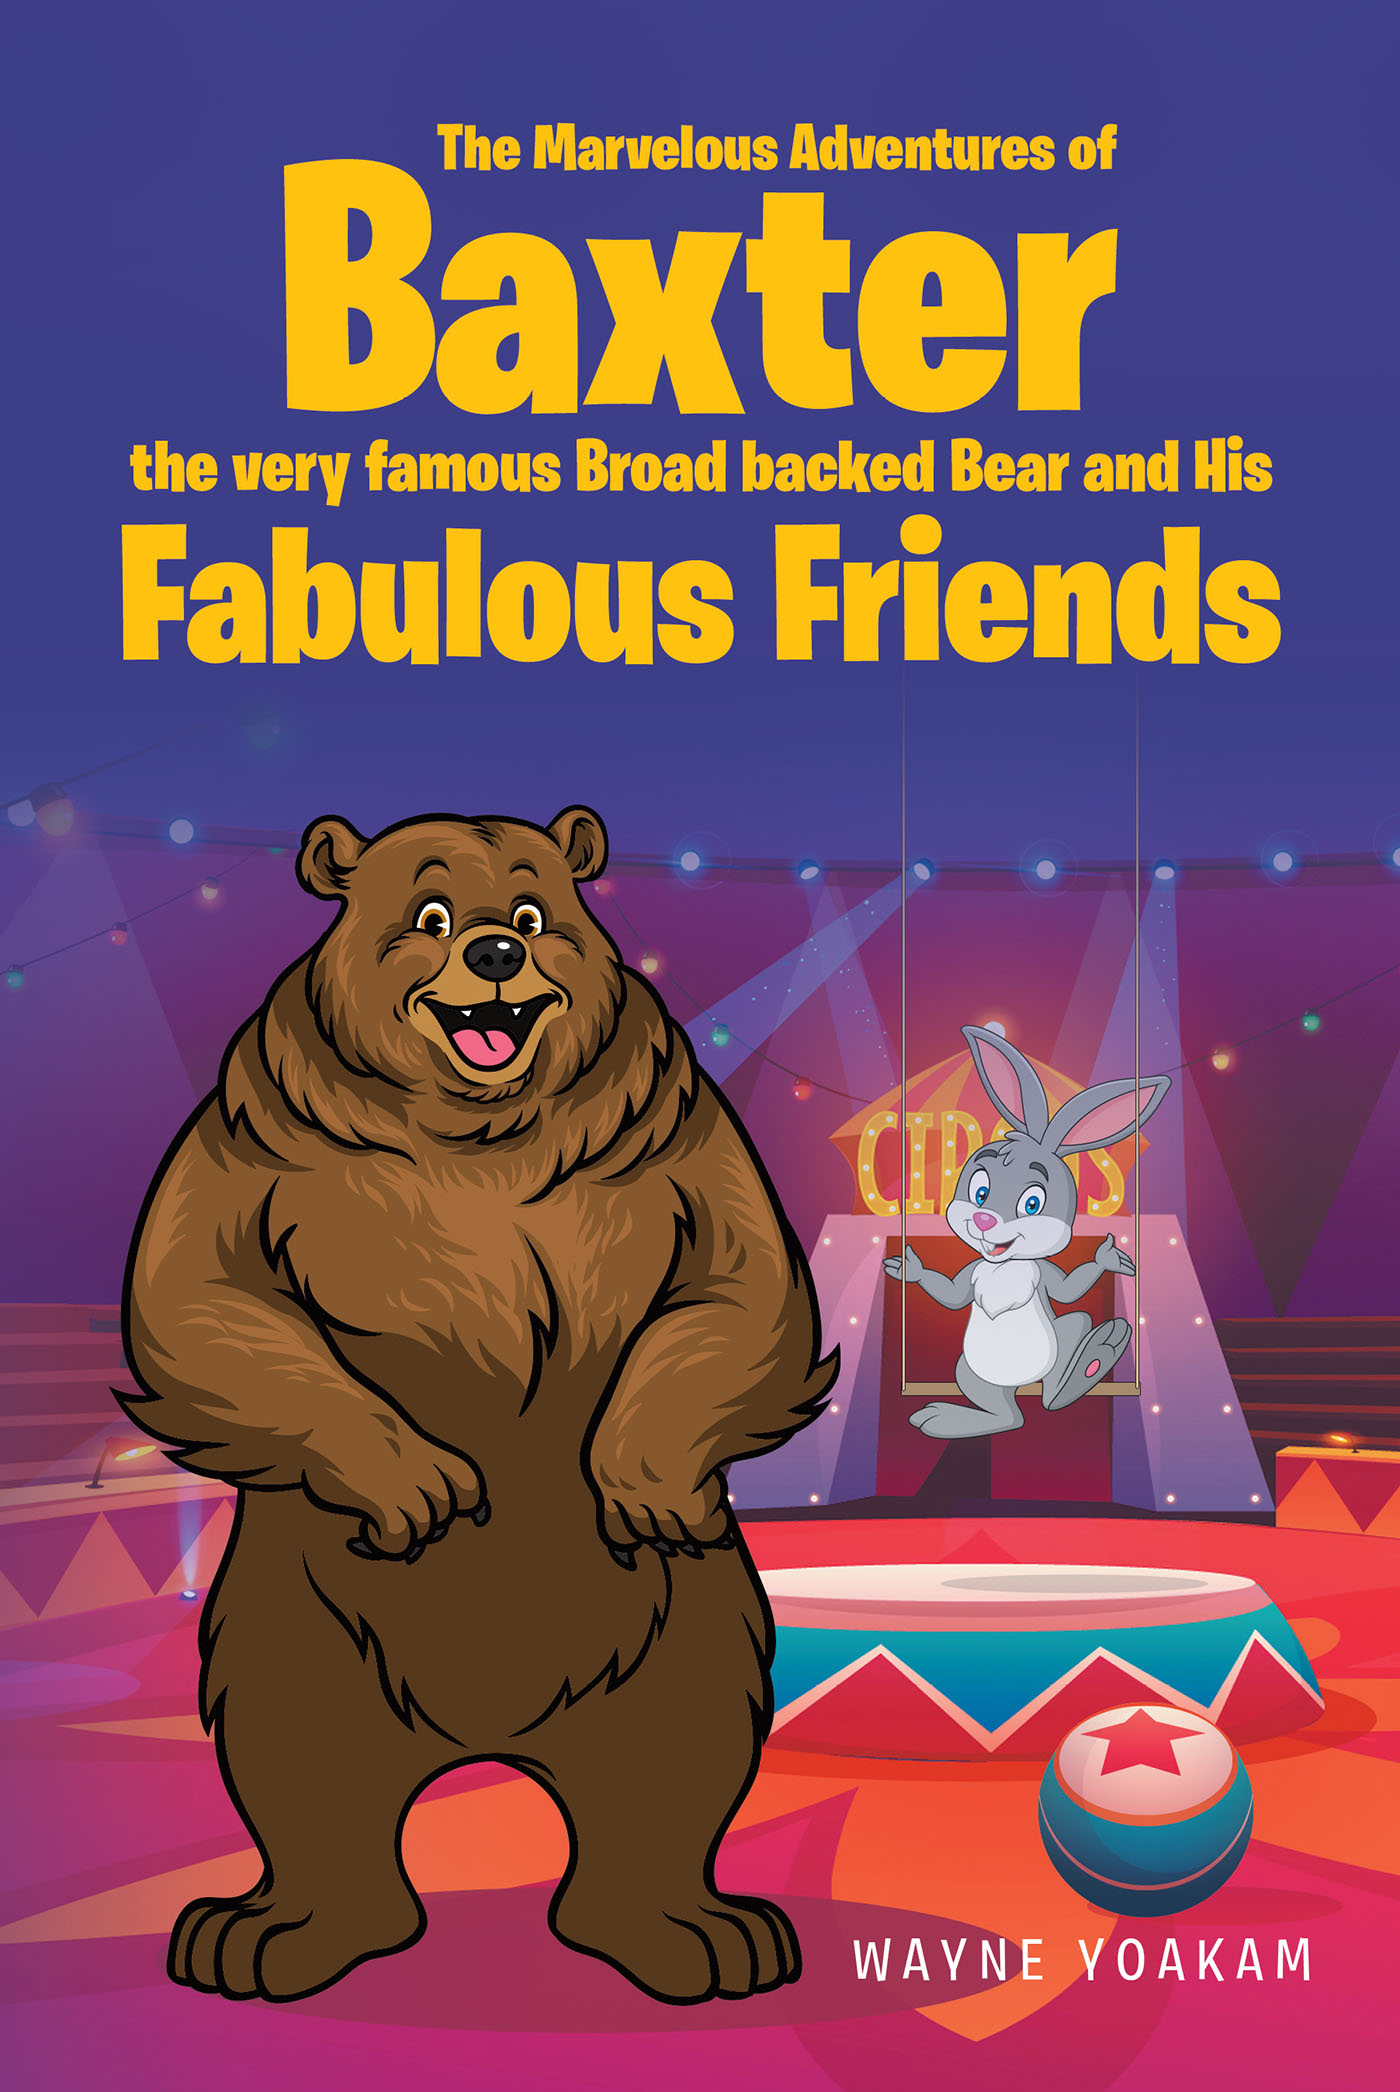 Wayne Yoakam’s New Book, “The Marvelous Adventures of Baxter the very famous Broad backed Bear and His Fabulous Friends,” Follows a Bear with a Very Unique Talent